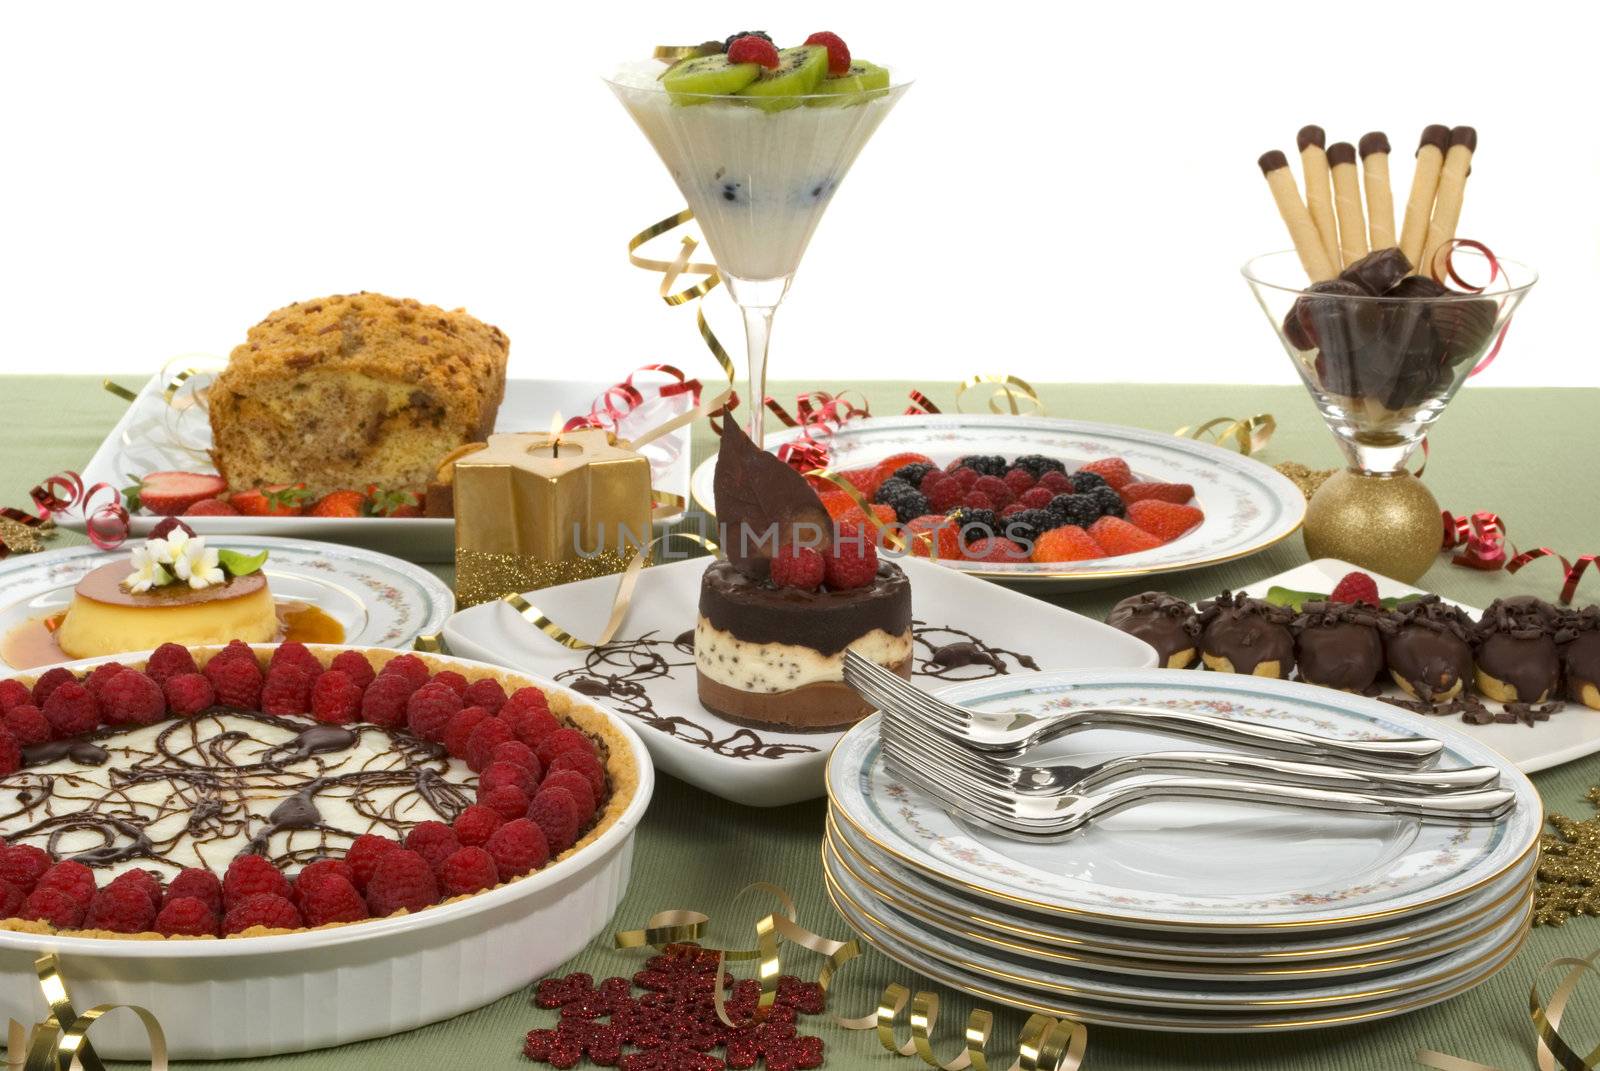 Elegant table with many desserts and fruits (eclair, pecan swirl cake, raspberry pie, rice pudding, cheese cake and more)